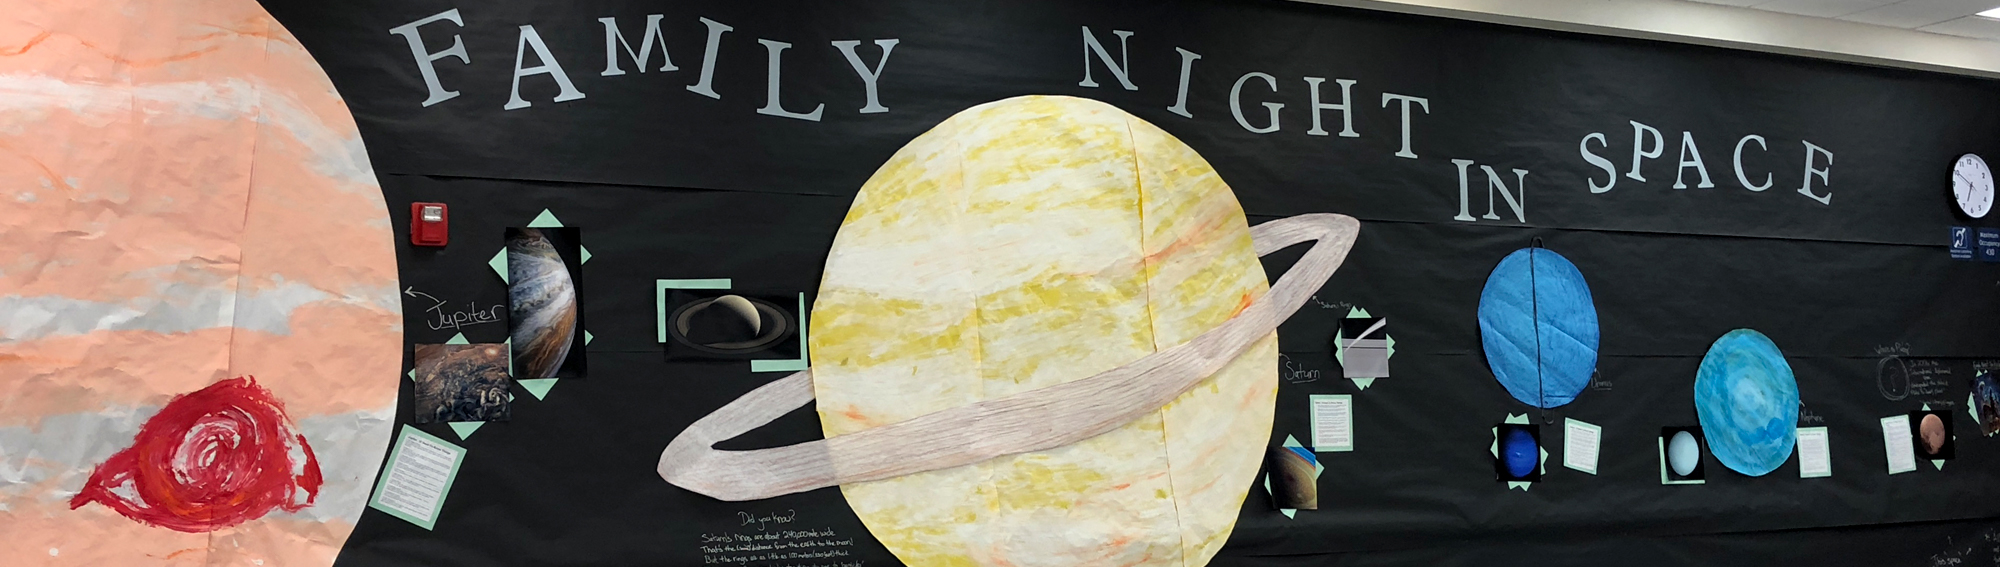 bulletin board that says Family night in space 